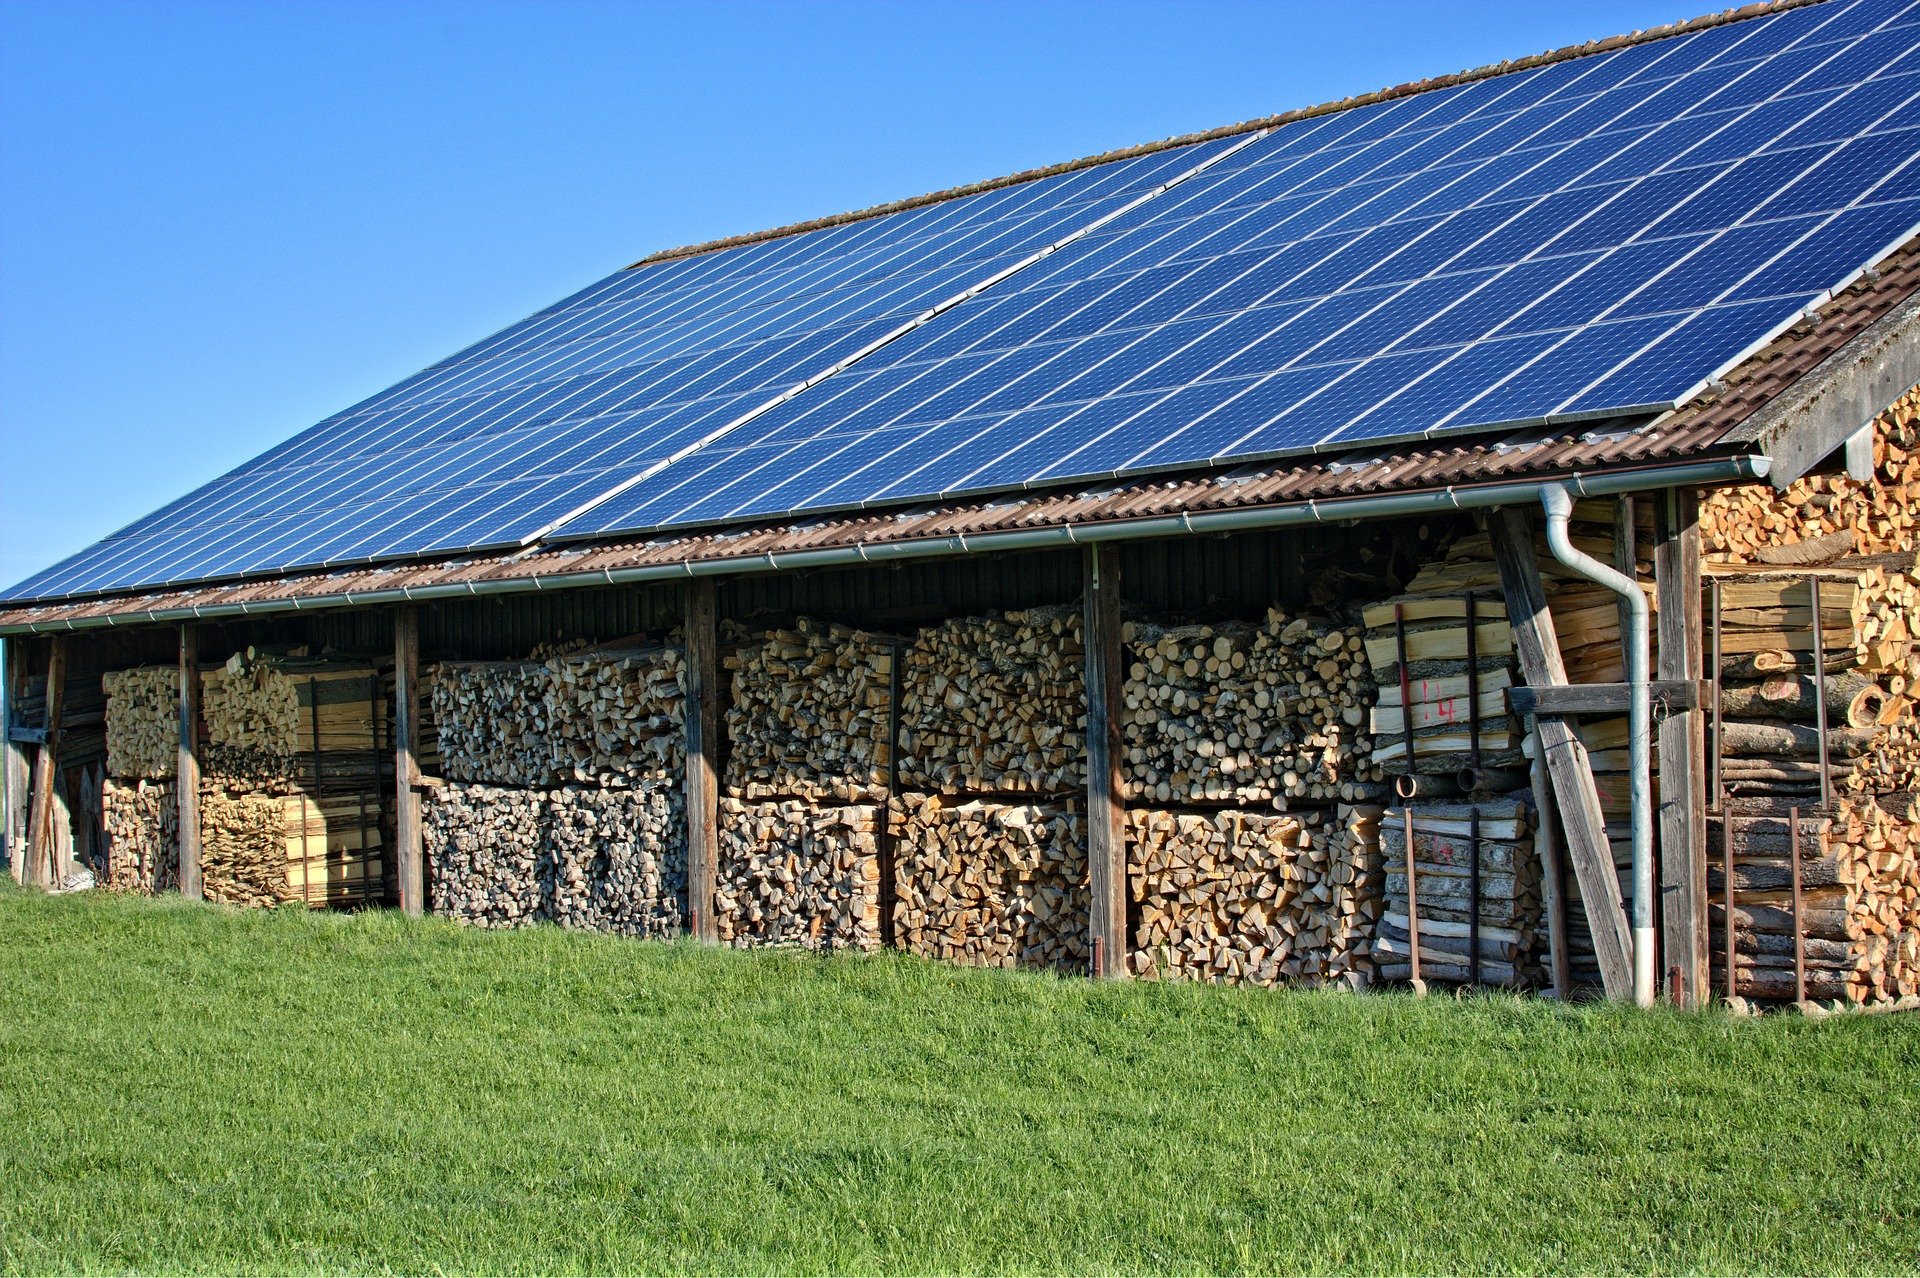 solar panels on roof of large wood shed